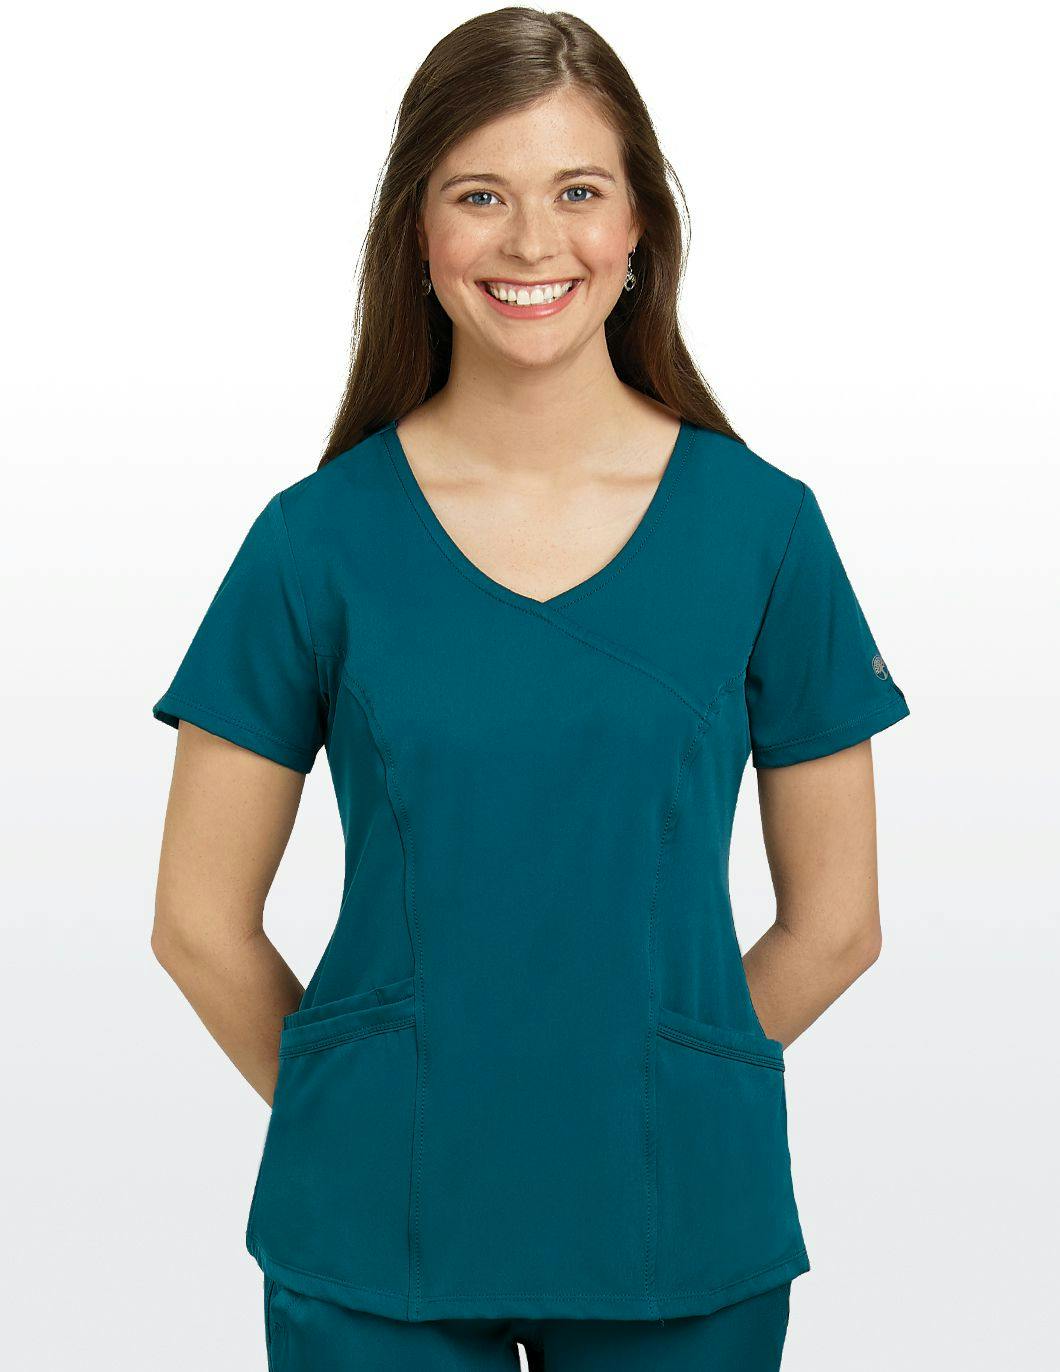 healing-hands-hh-works-womens-crossover-pocket-scrub-top-caribbean